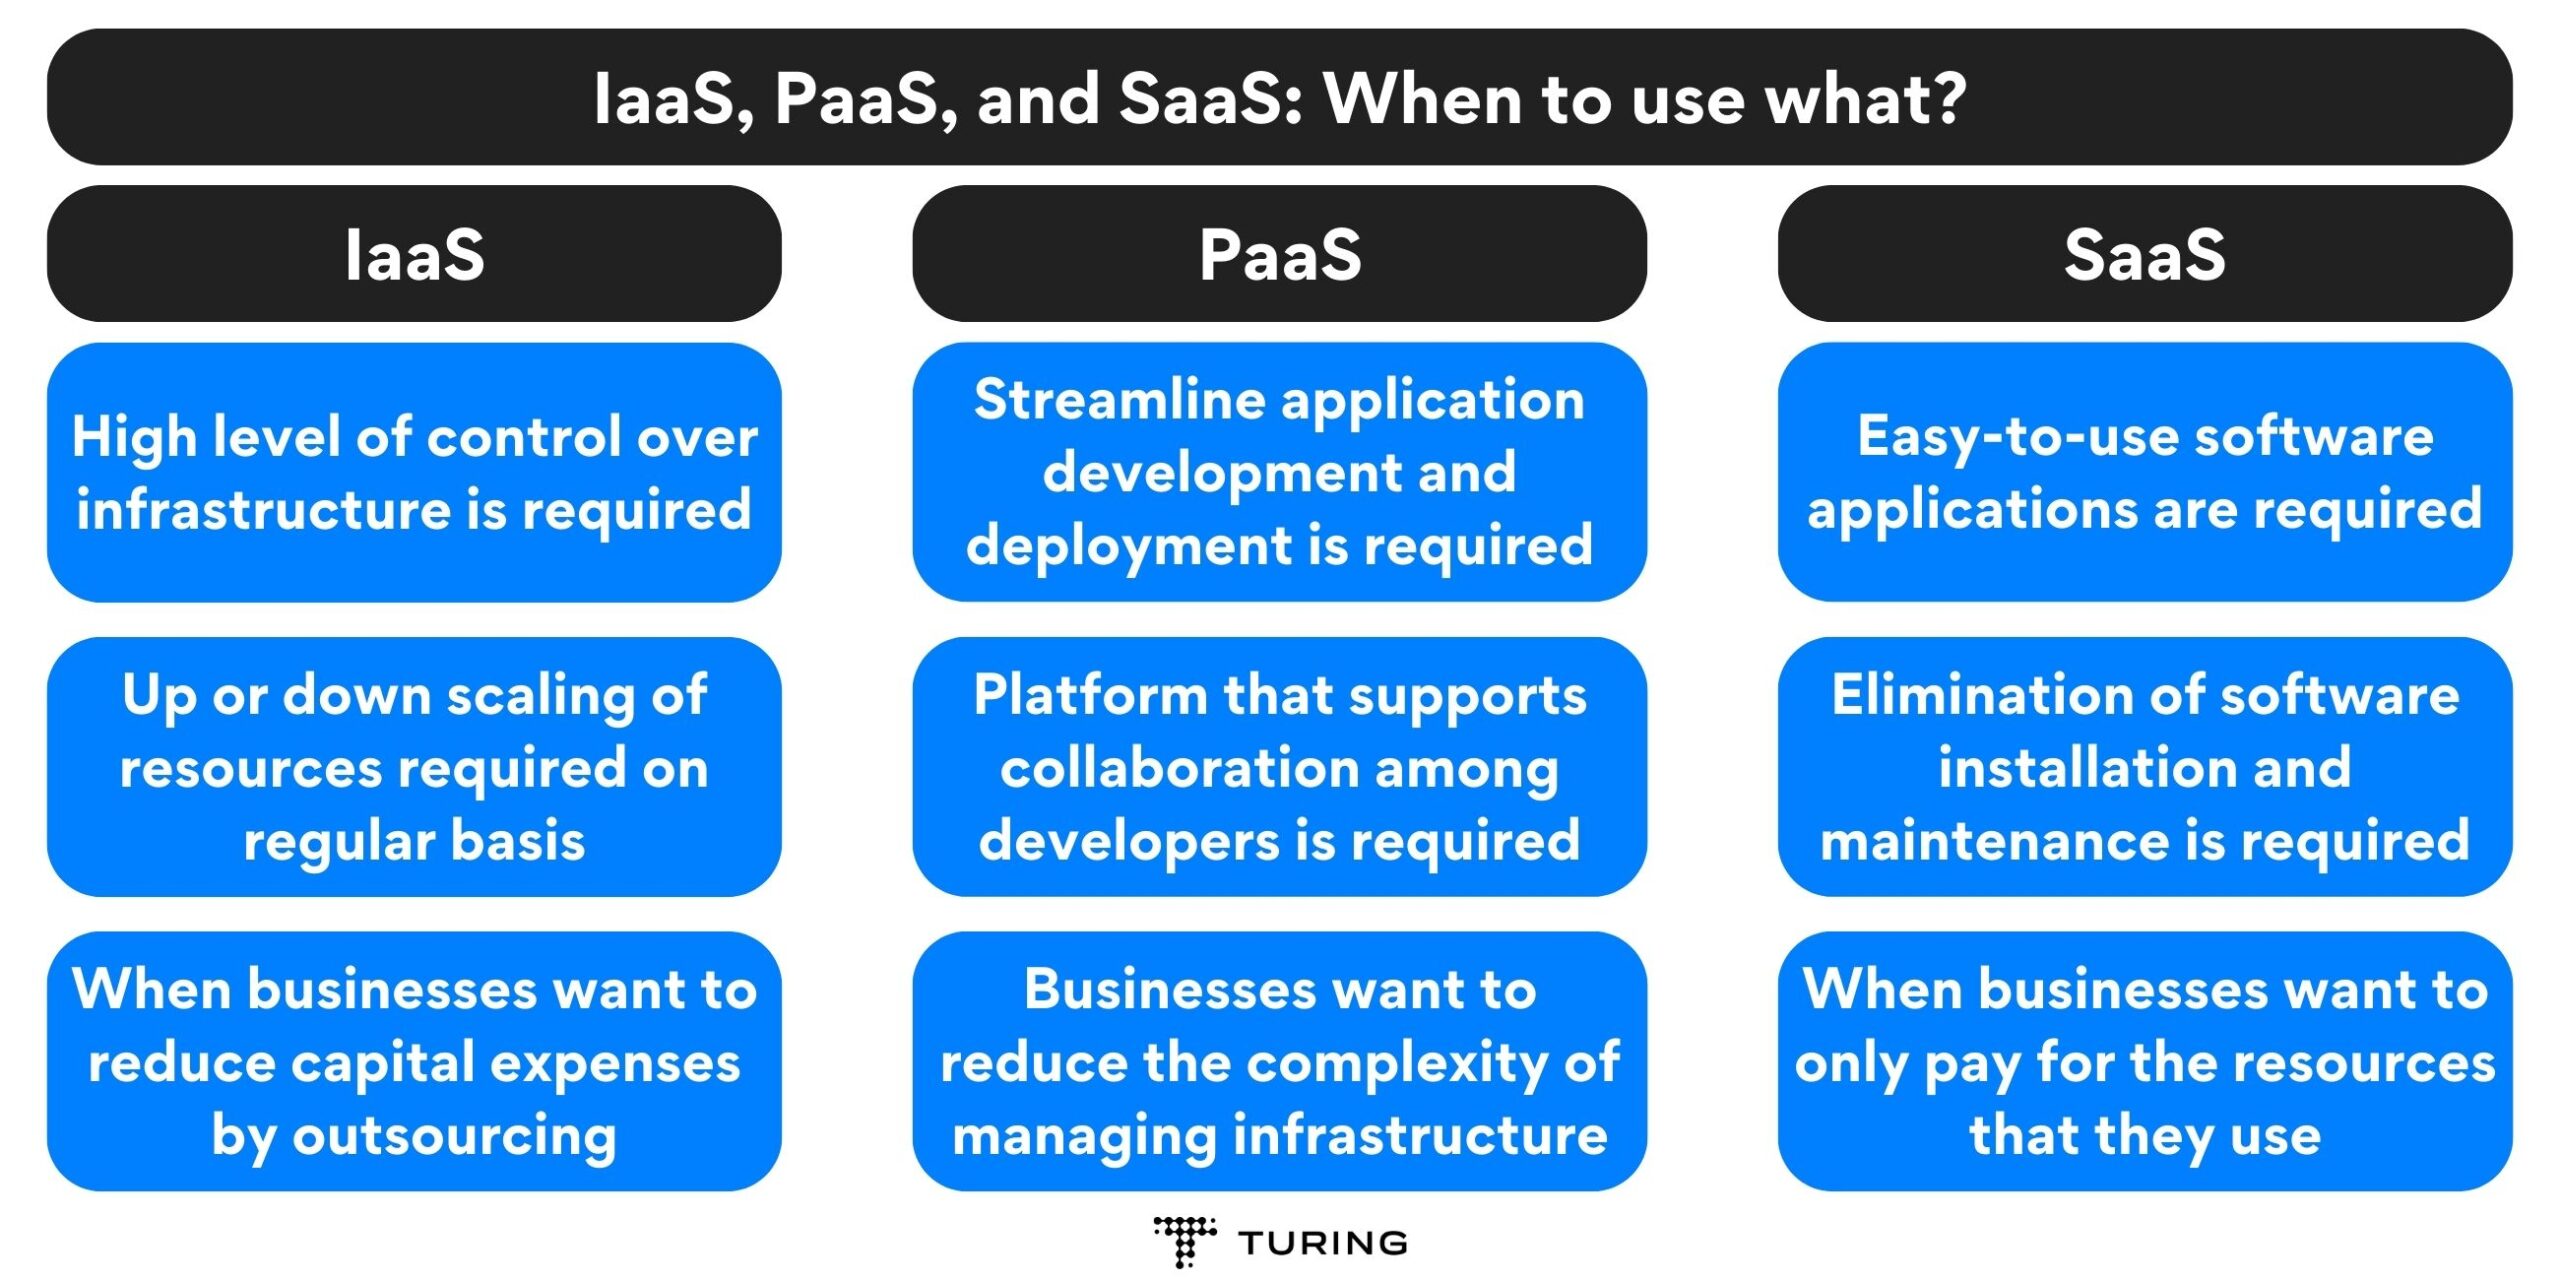 When to use IaaS, PaaS, and SaaS?